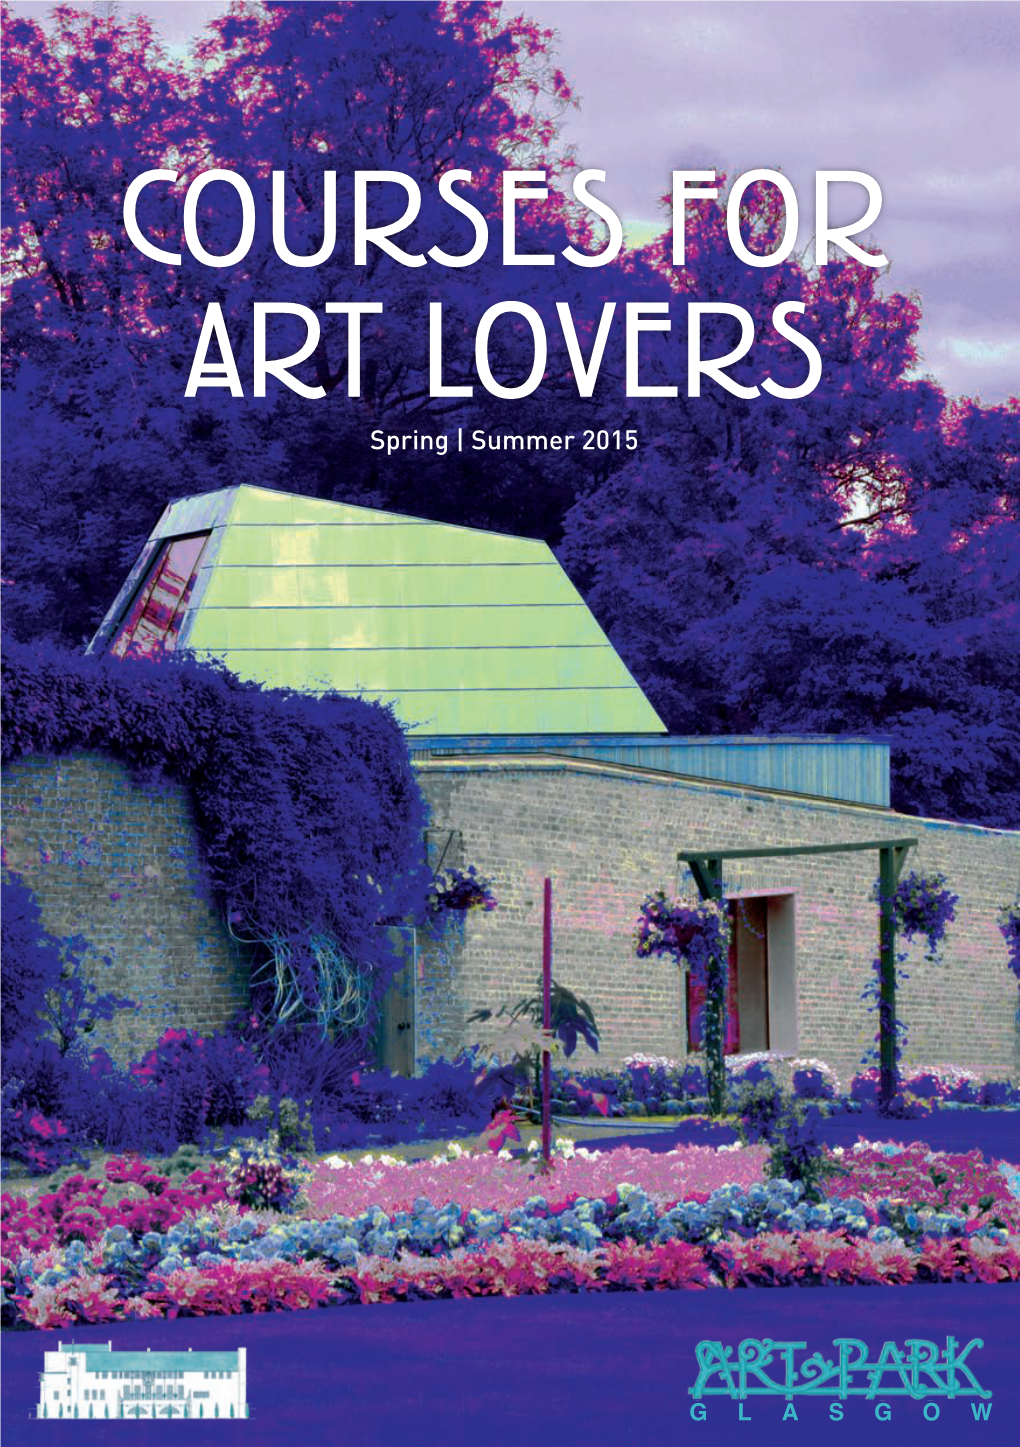 Courses for Art Lovers Spring | Summer 2015